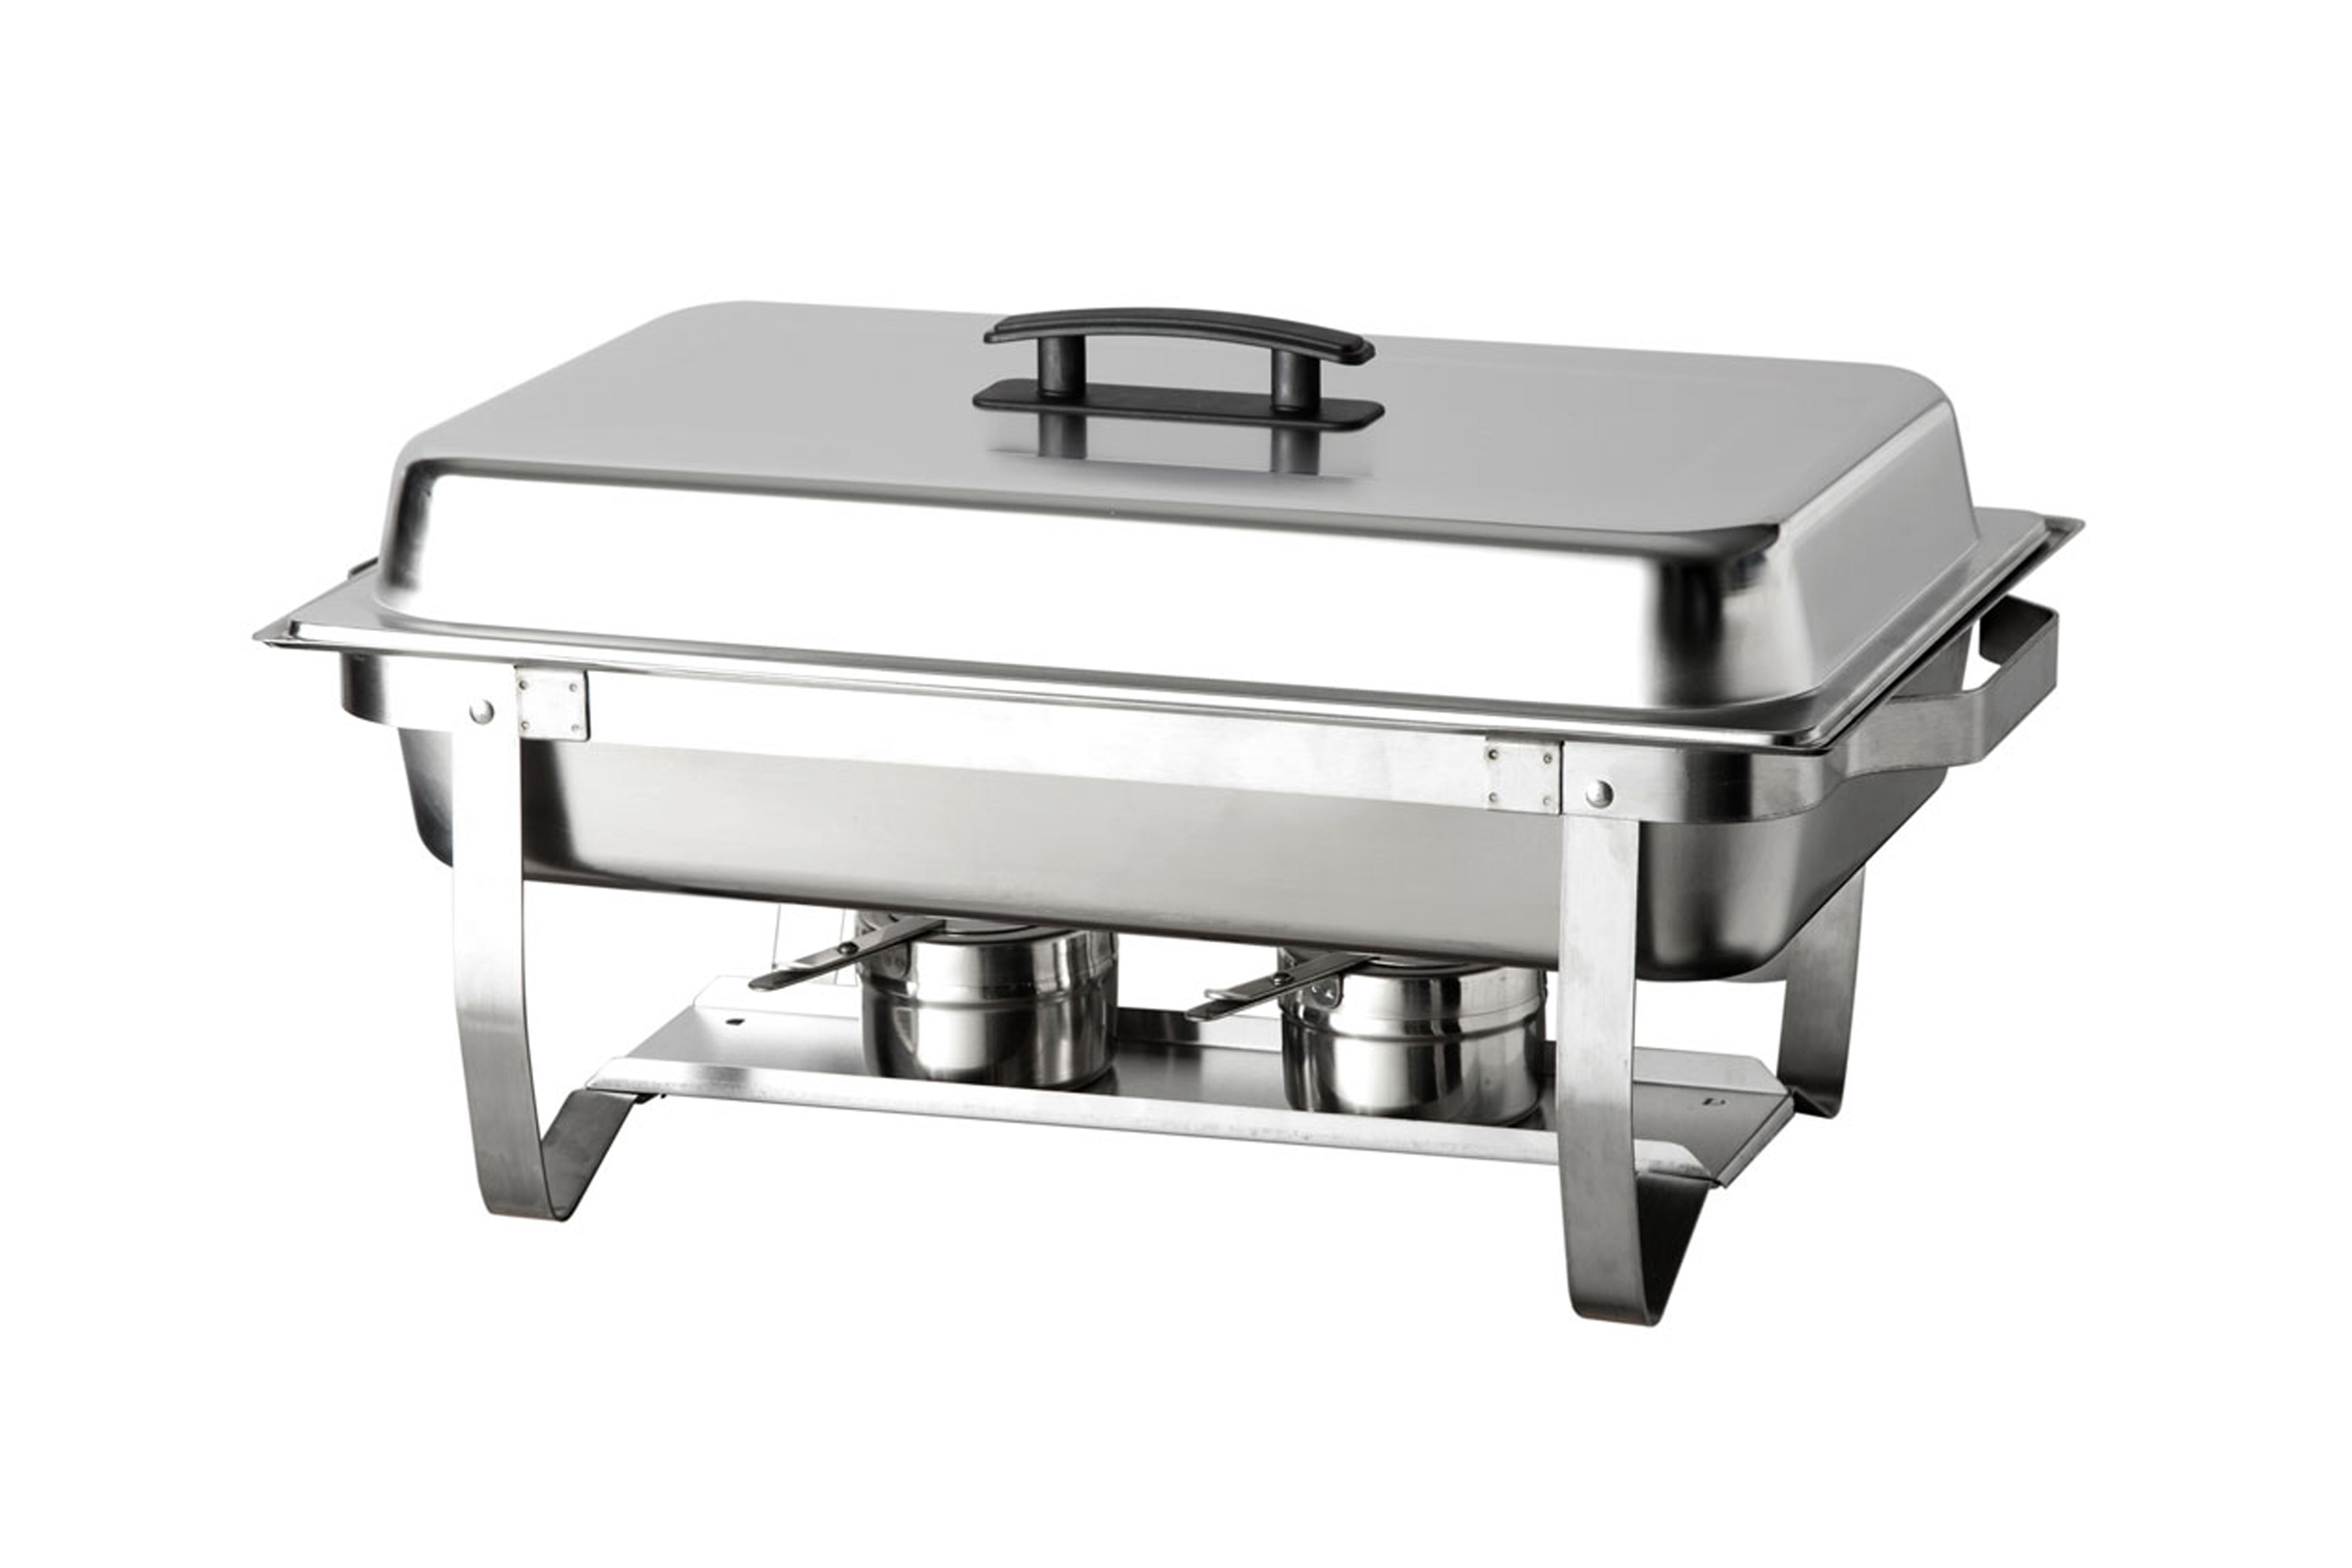 2023: How Much Does It Cost to Rent A Chafing Dish? 